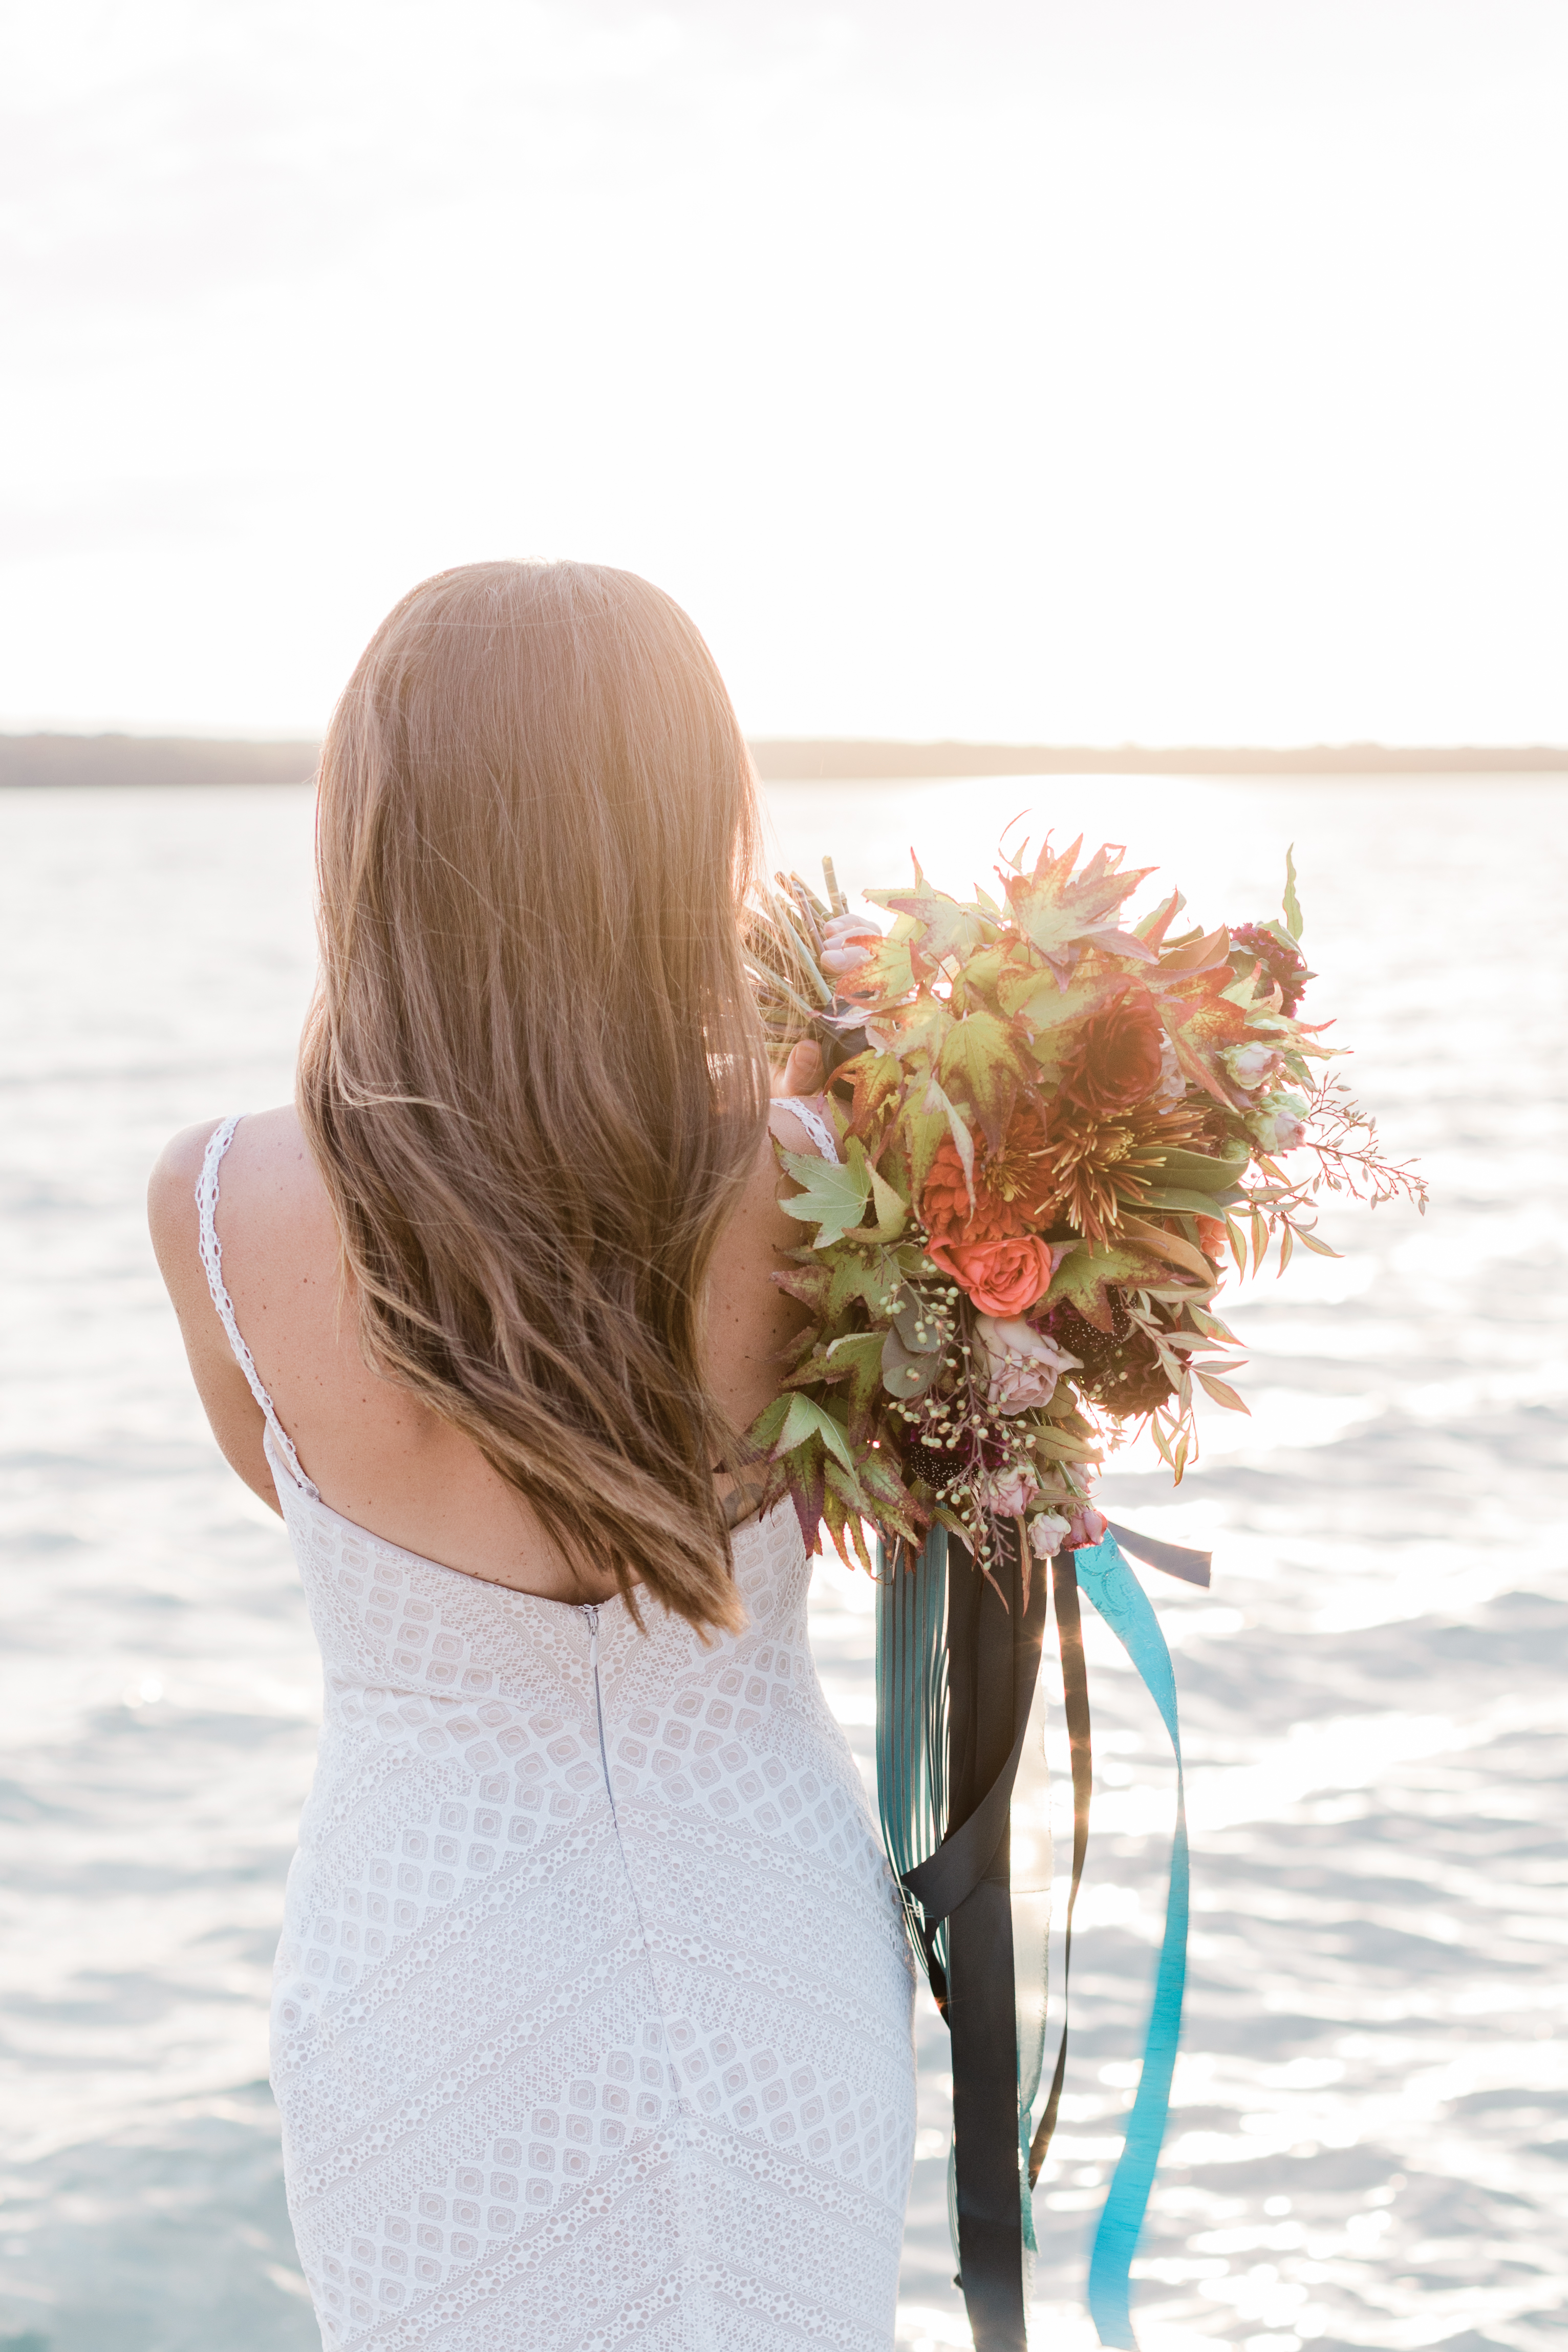 brunette bride holds huge bouquet of seasonal flowers over her shoulder and looks out at ocean.